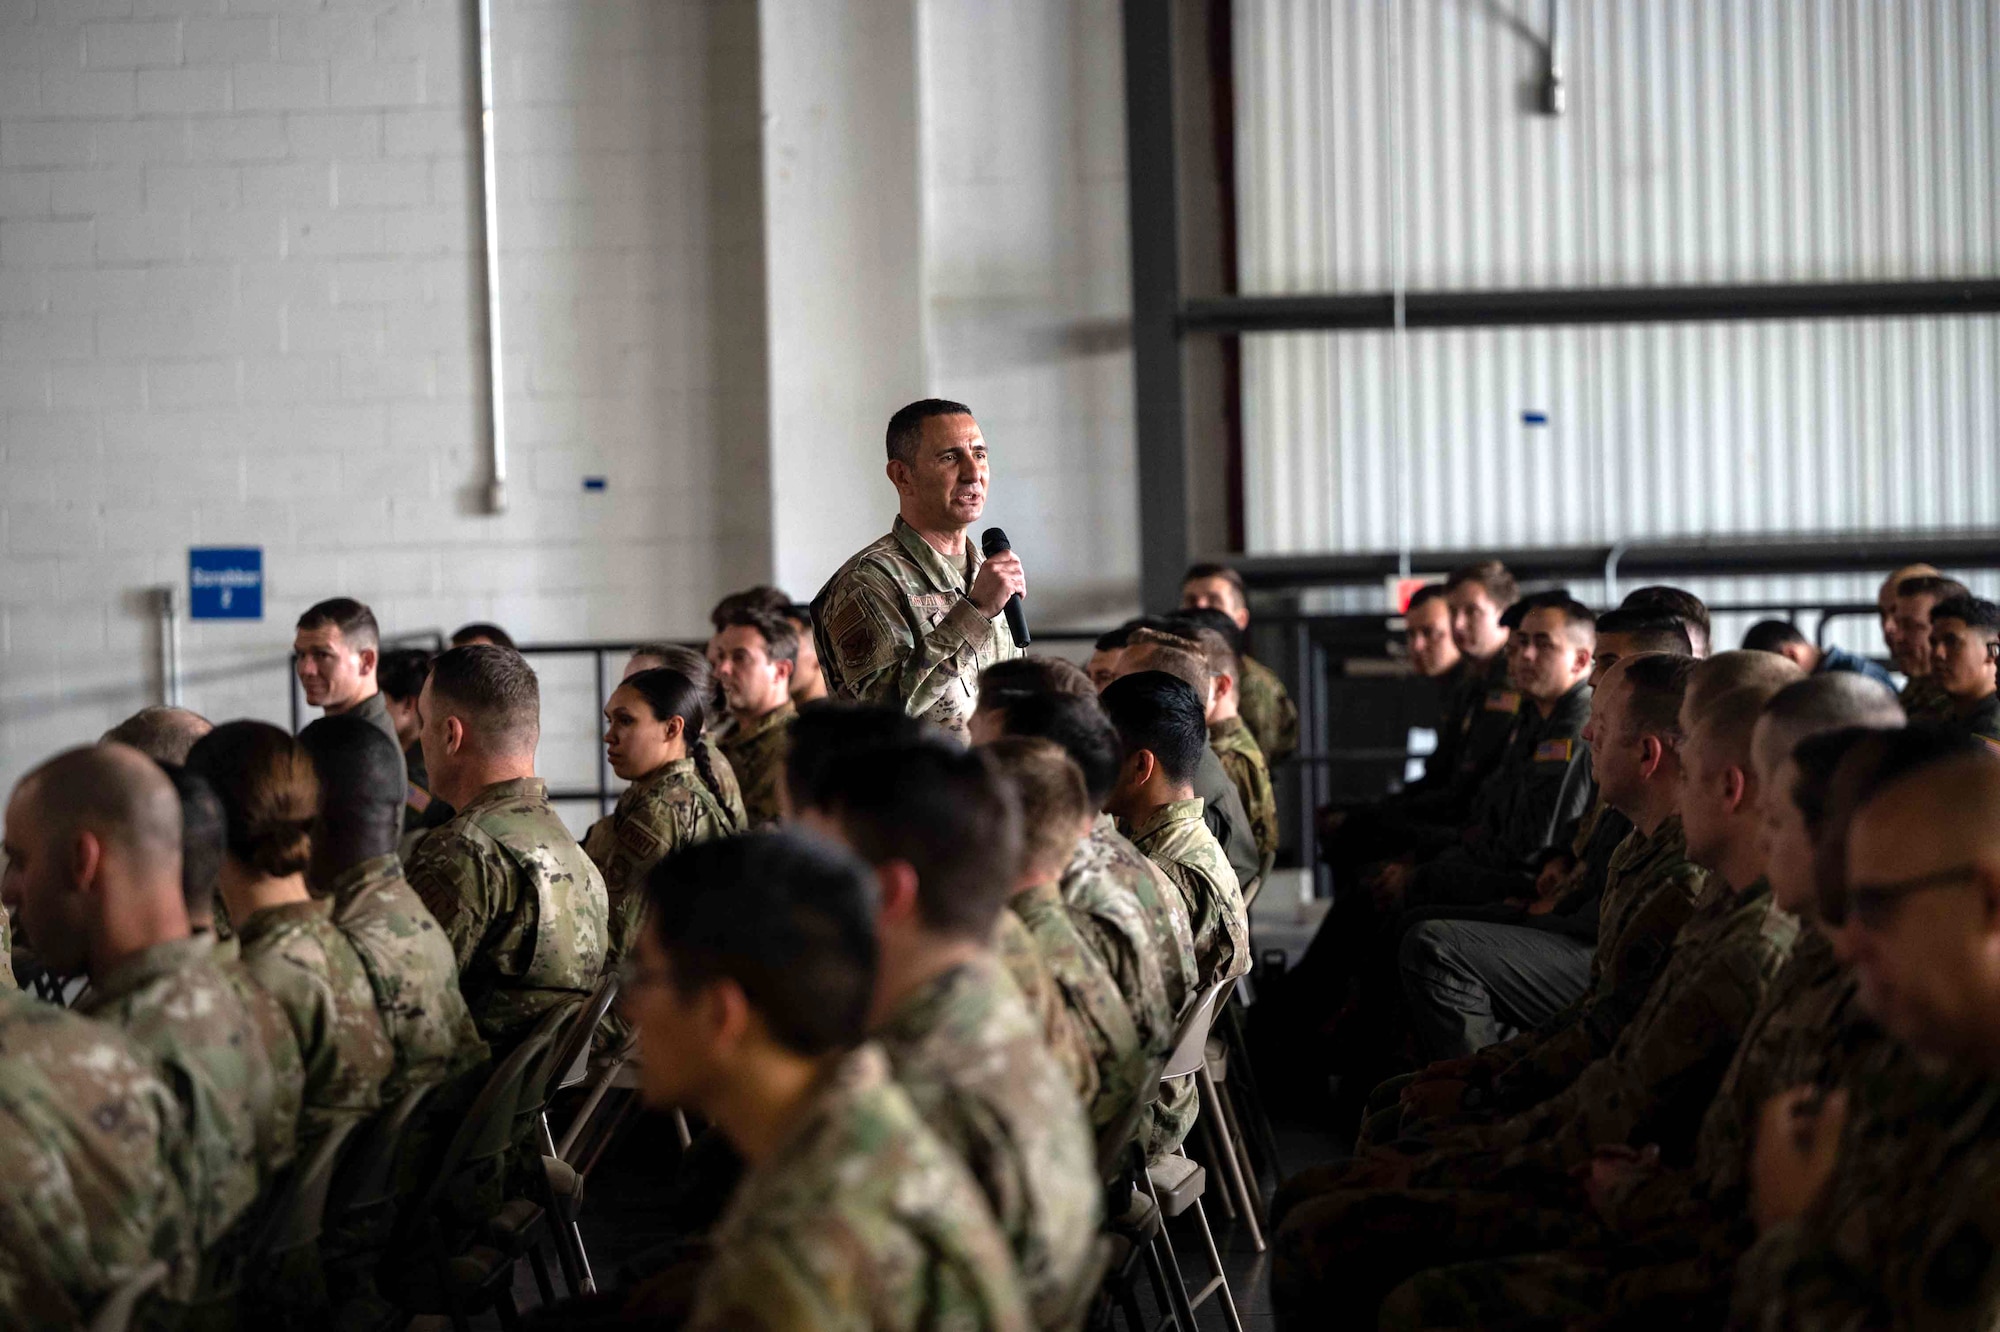 Chief Master Sgt. Brian Kruzelnick, Air Mobility Command command chief, speaks to Airmen during an all call at Dover Air Force Base, Delaware, May 5, 2022. During the all call, Kruzelnick discussed the state of the Air Force and how Dover AFB is innovating to accelerate change or lose. (U.S. Air Force photo by Senior Airman Faith Schaefer)